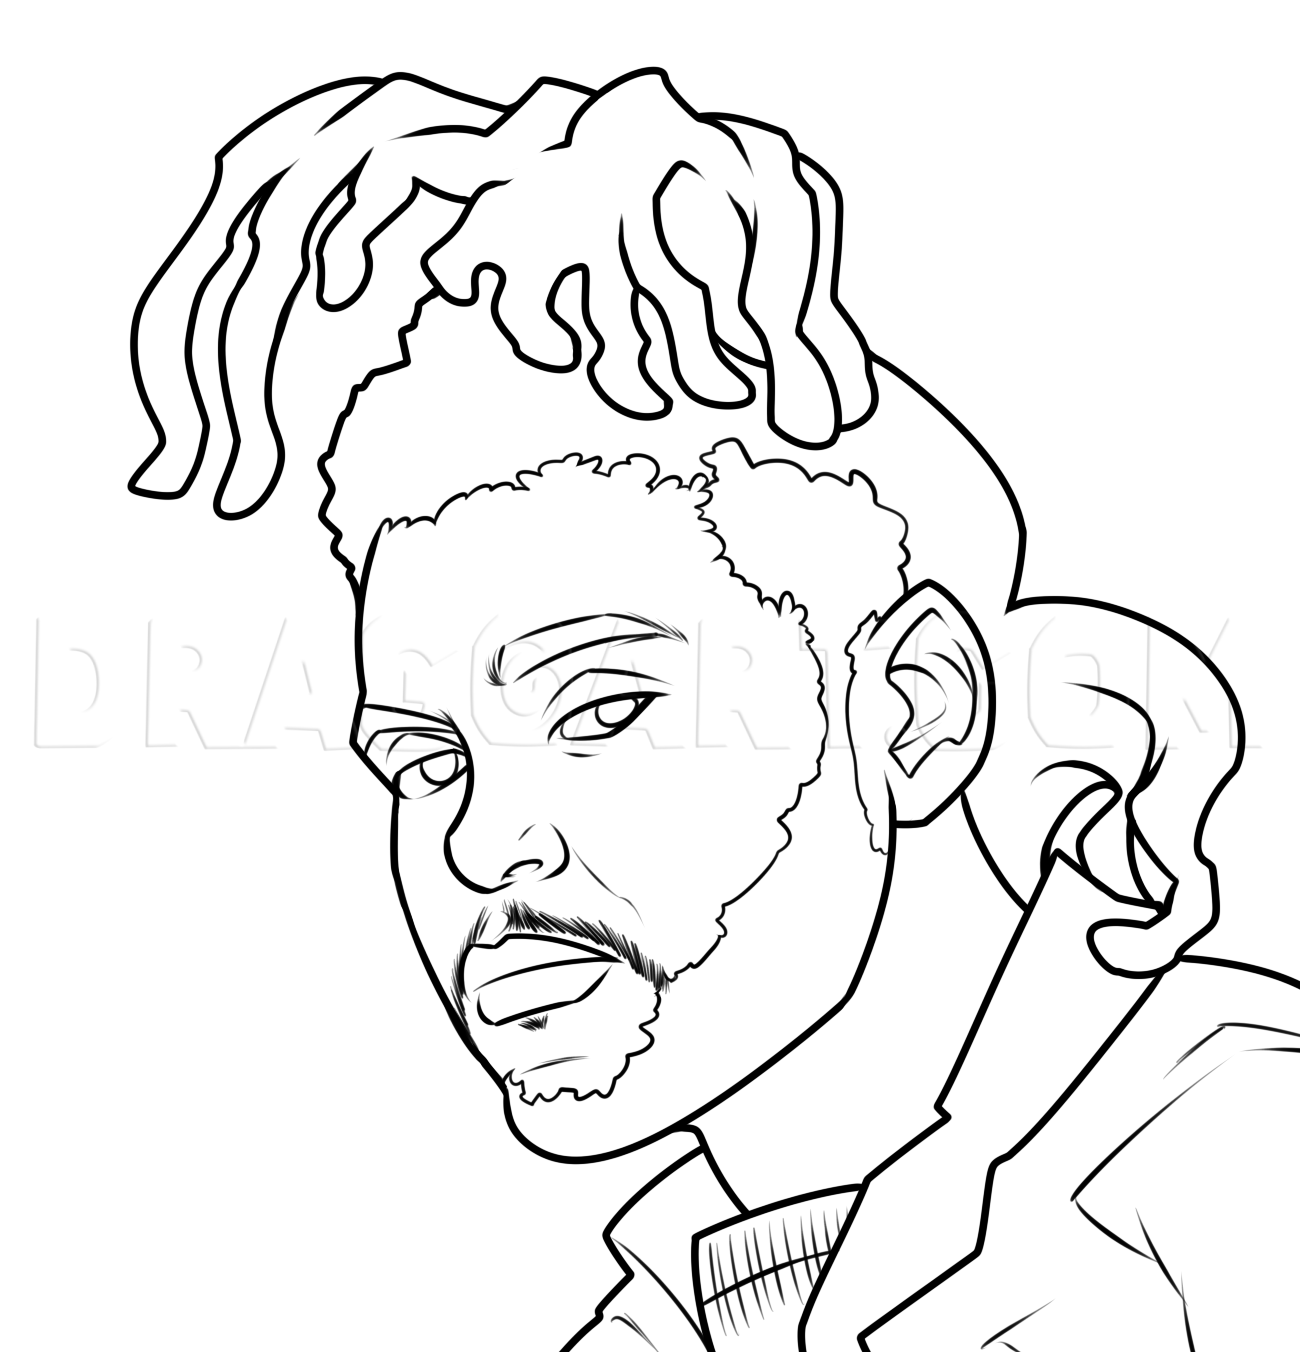 The Weeknd coloring page